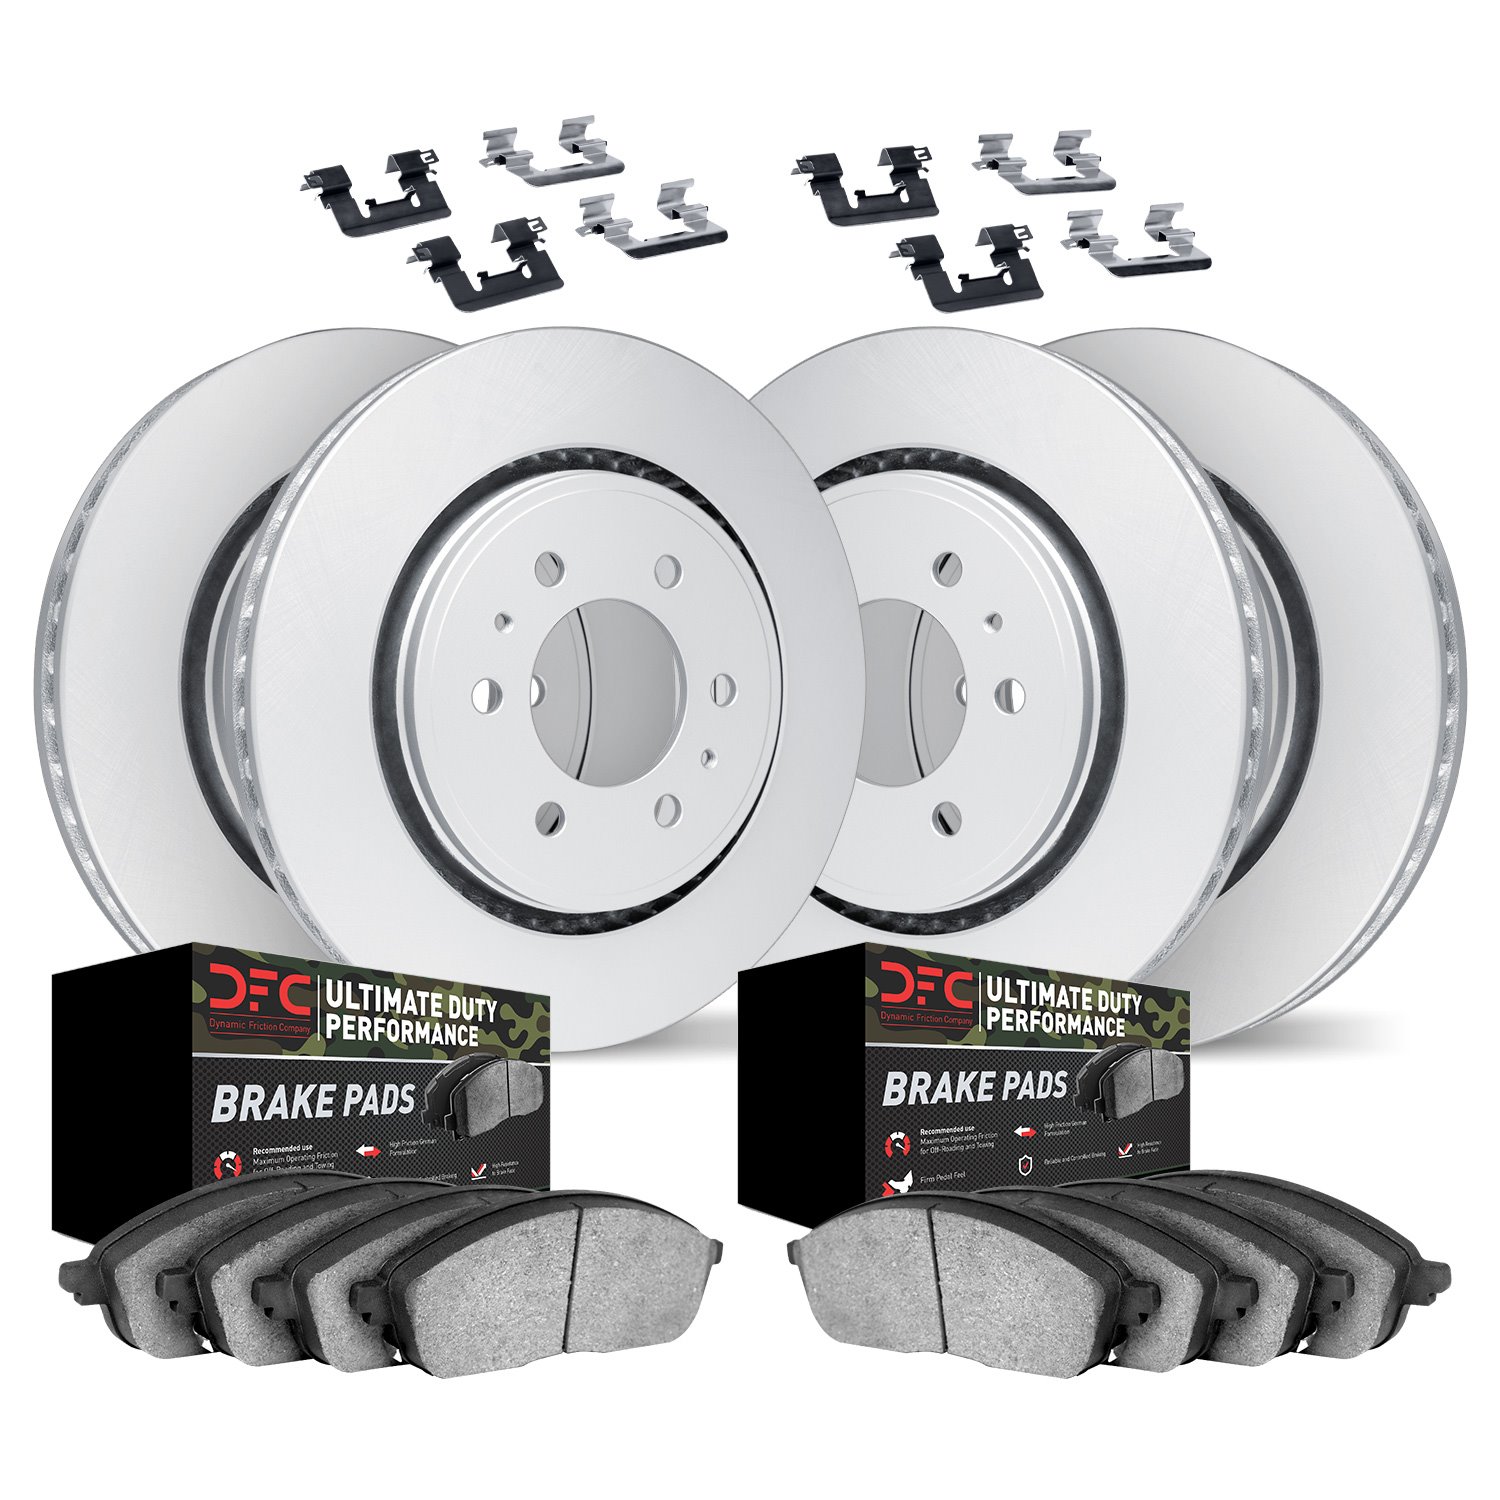 4414-67005 Geospec Brake Rotors with Ultimate-Duty Brake Pads & Hardware, Fits Select Infiniti/Nissan, Position: Front and Rear